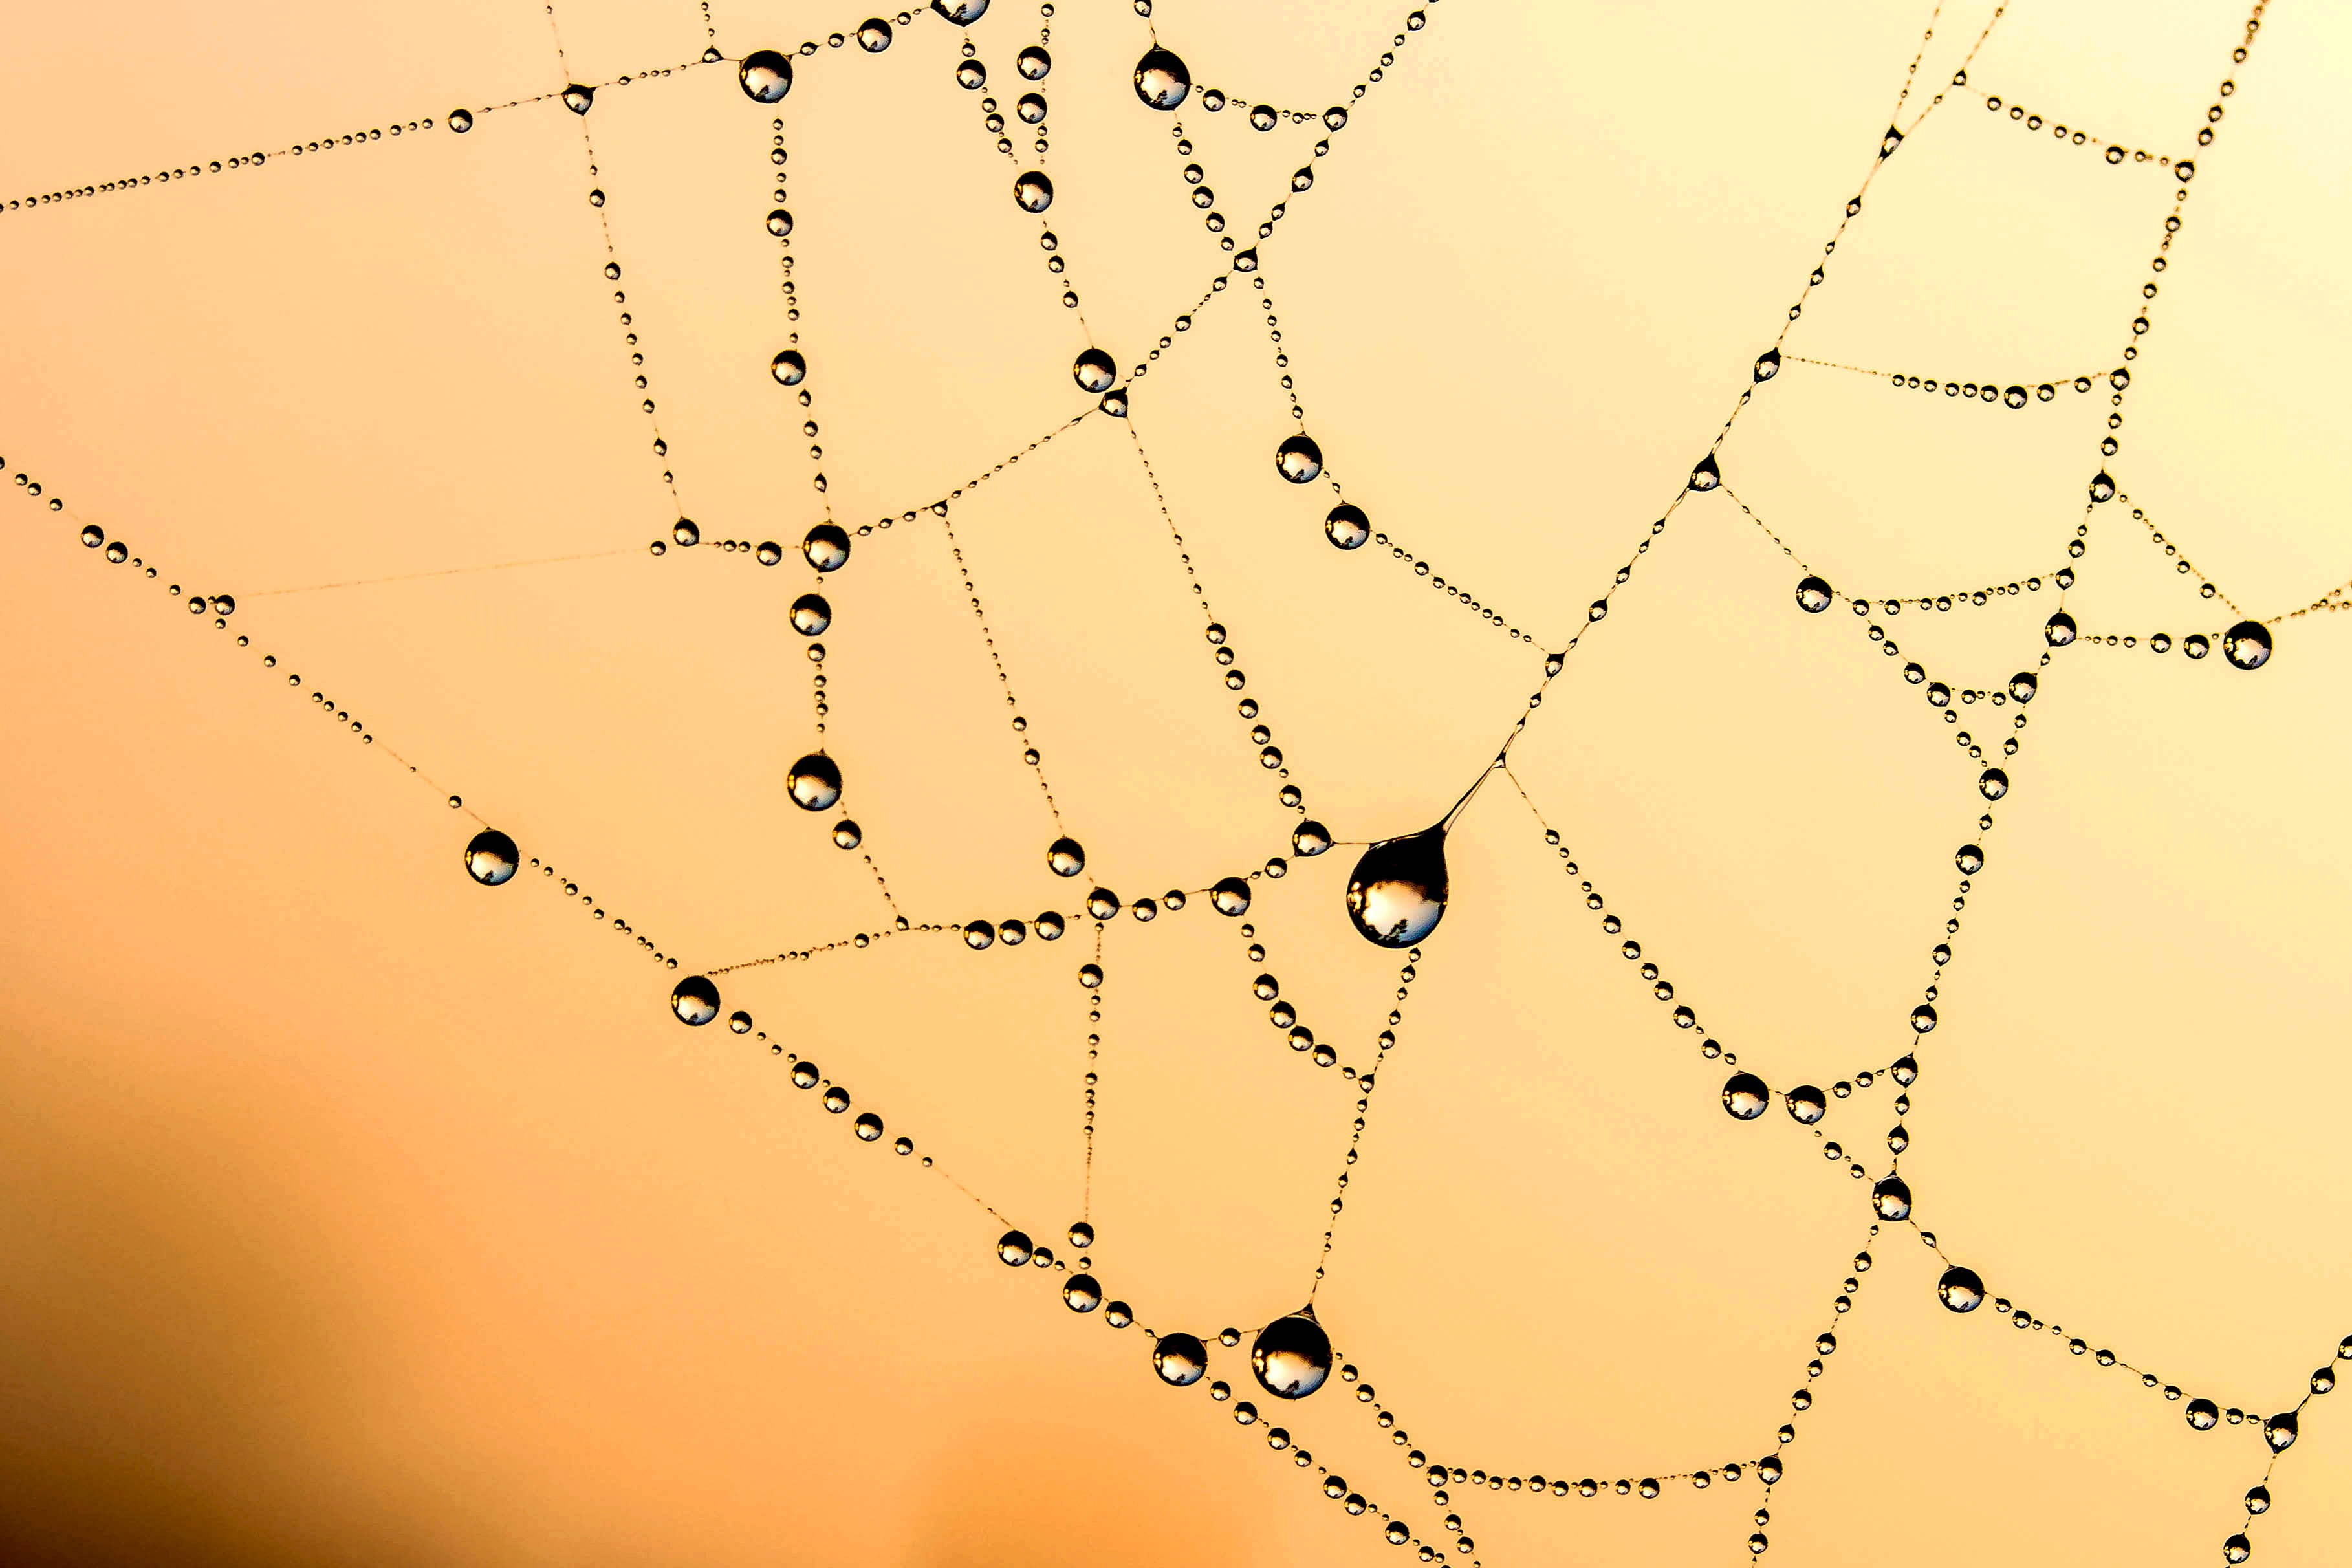 spider web with water dew